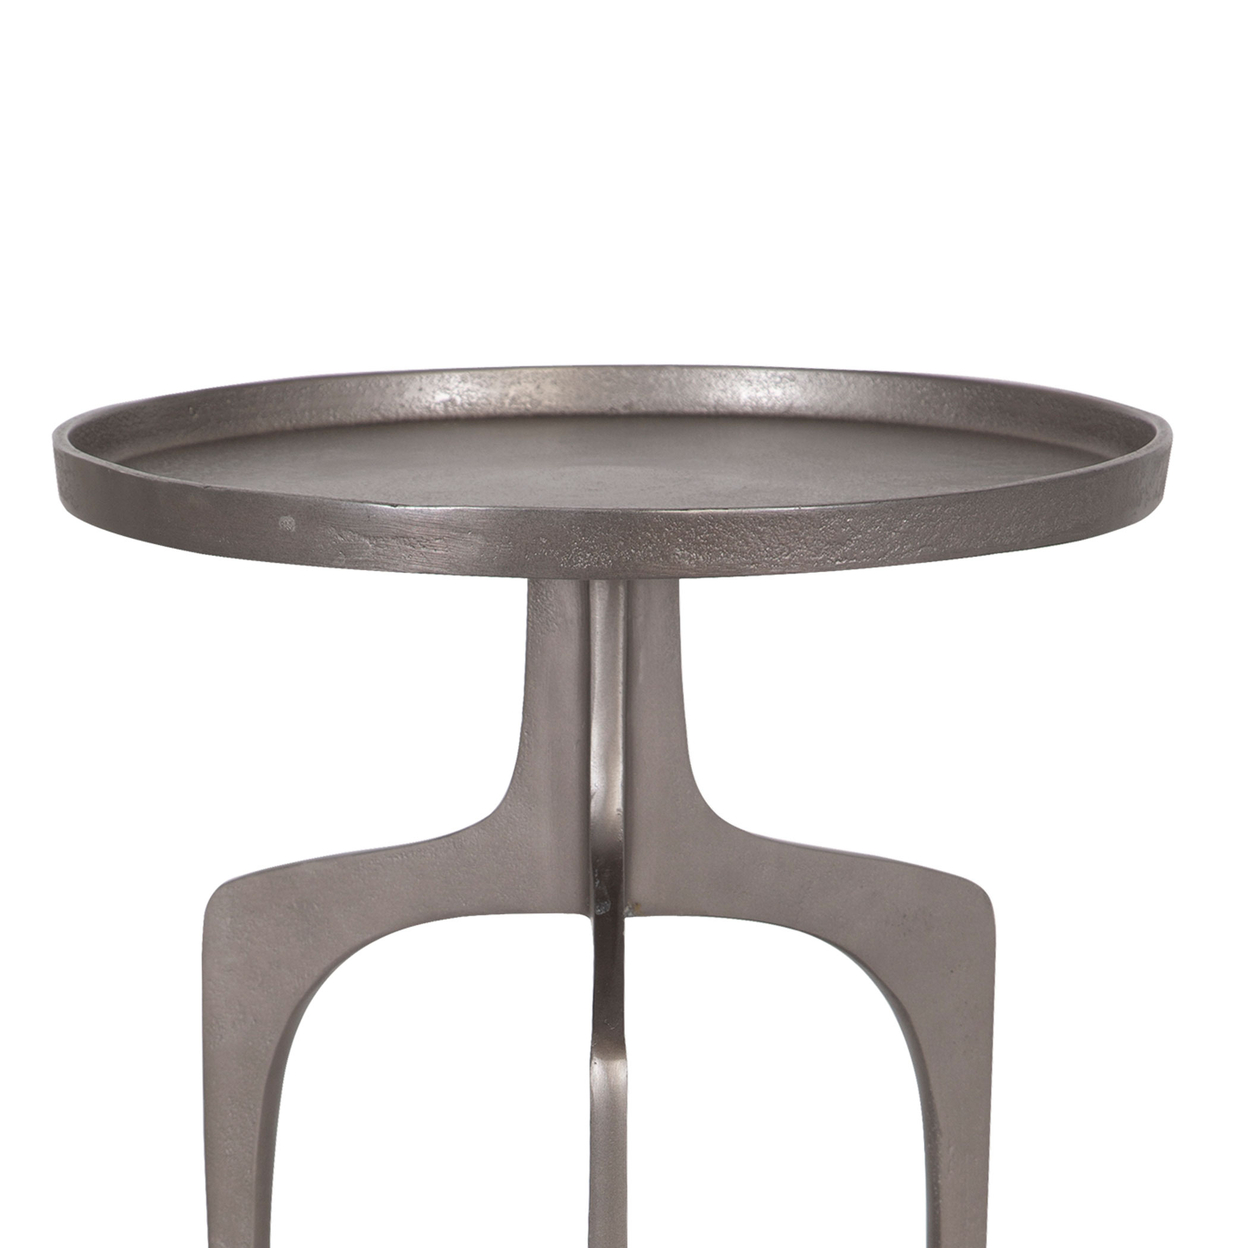 22 Inch Metal Round Accent Table, Three Curved Legs, Nickel Silver- Saltoro Sherpi